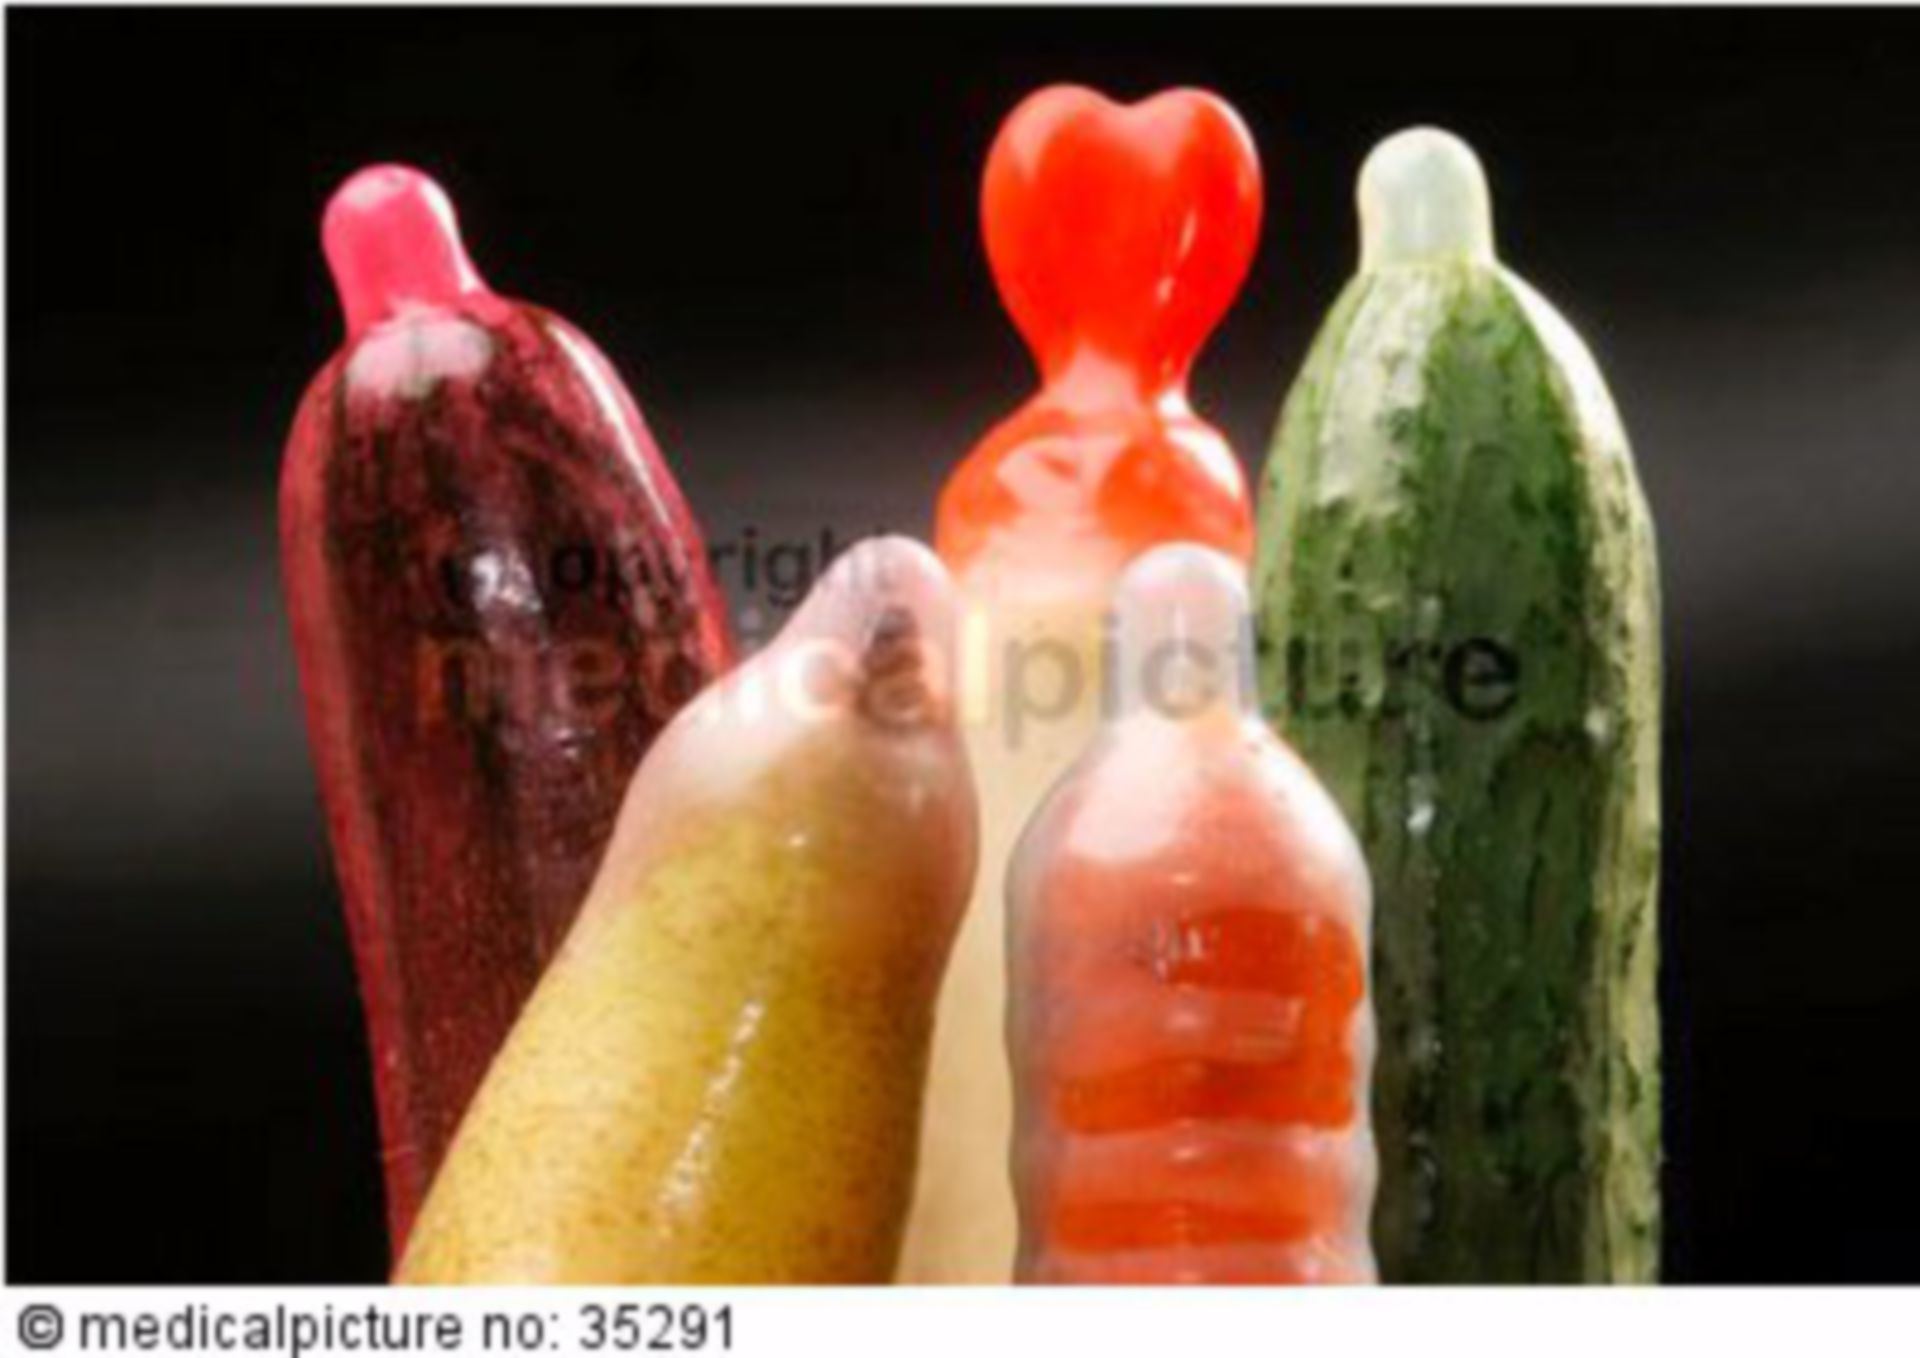 Condoms on Fruits and Vegetables